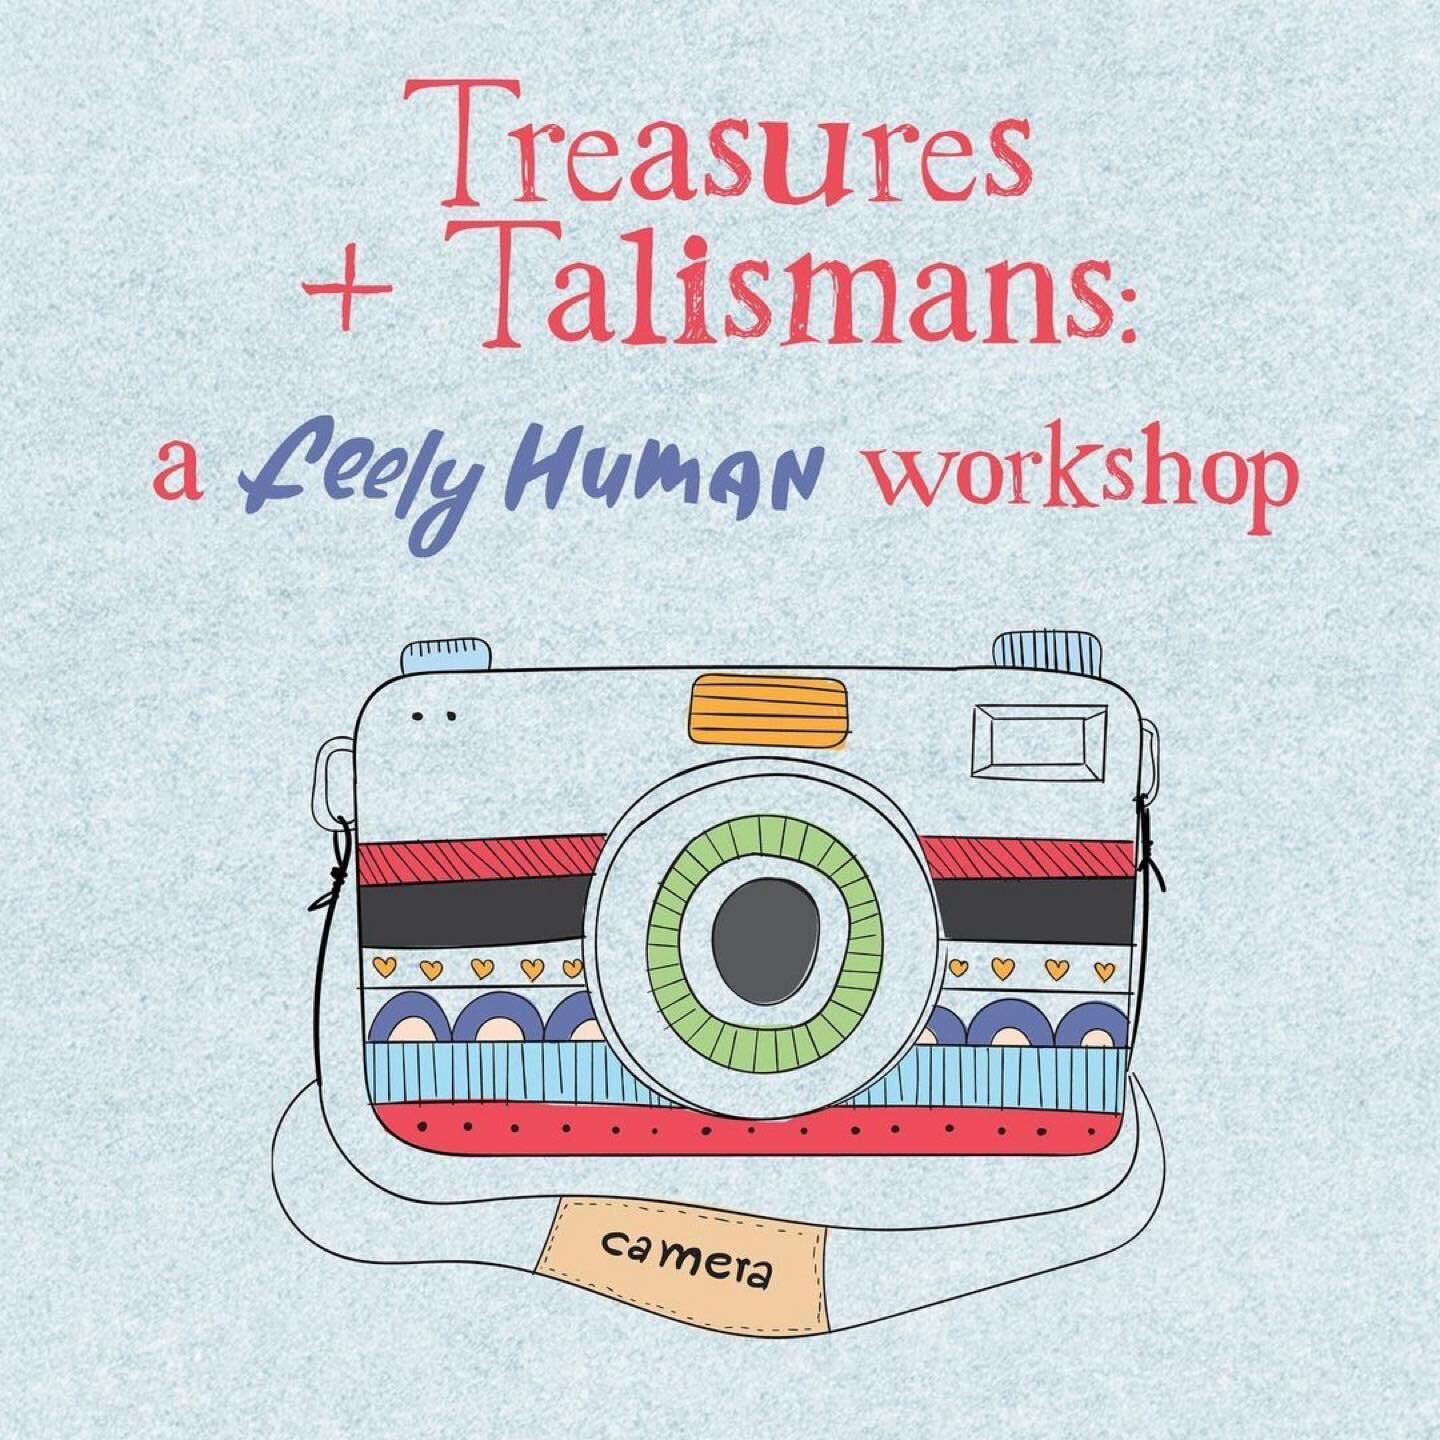 {REPOST from @feelyhuman}
✏️ 💜 
Introducing a new workshop: TREASURES + TALISMANS!
Led by author Janet Reich Elsbach (@raisinporpoise), TREASURES + TALISMANS is a 3-hour workshop where we will explore the meaning and message in the keepsakes we valu